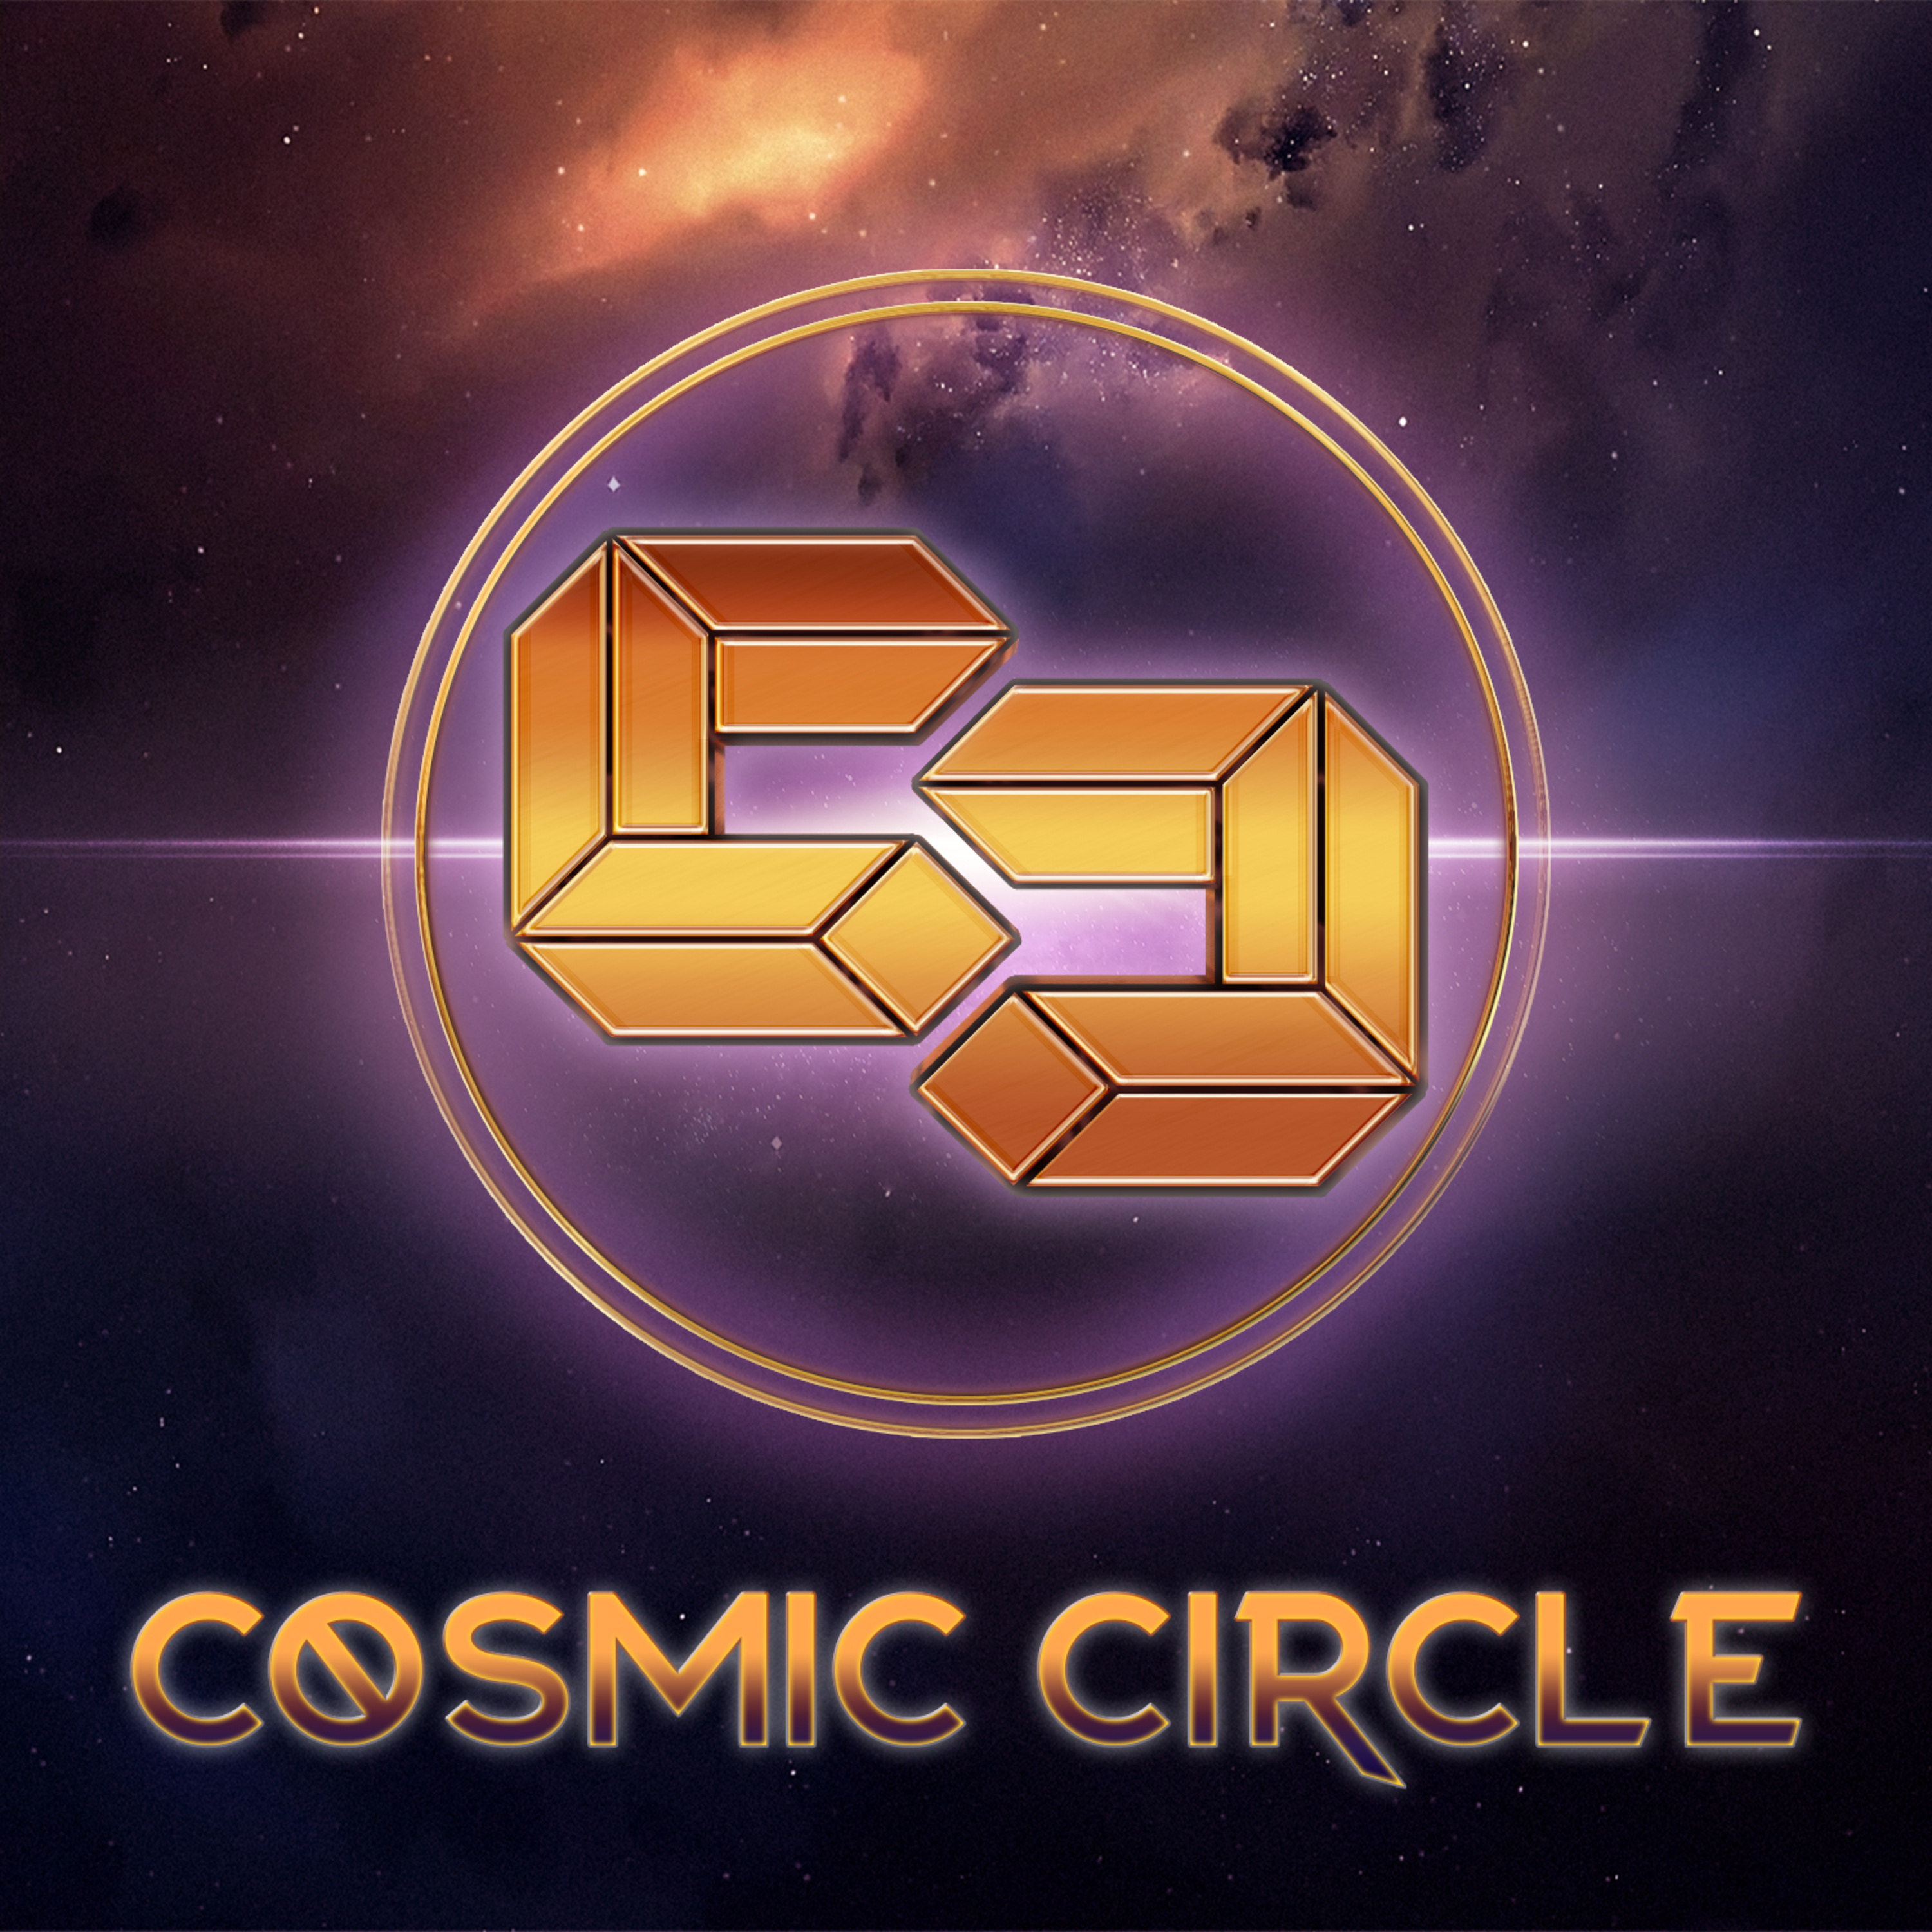 Cosmic Circle Ep. 29: 'Guardians of the Galaxy Vol. 3' Discussion (SPOILERS)